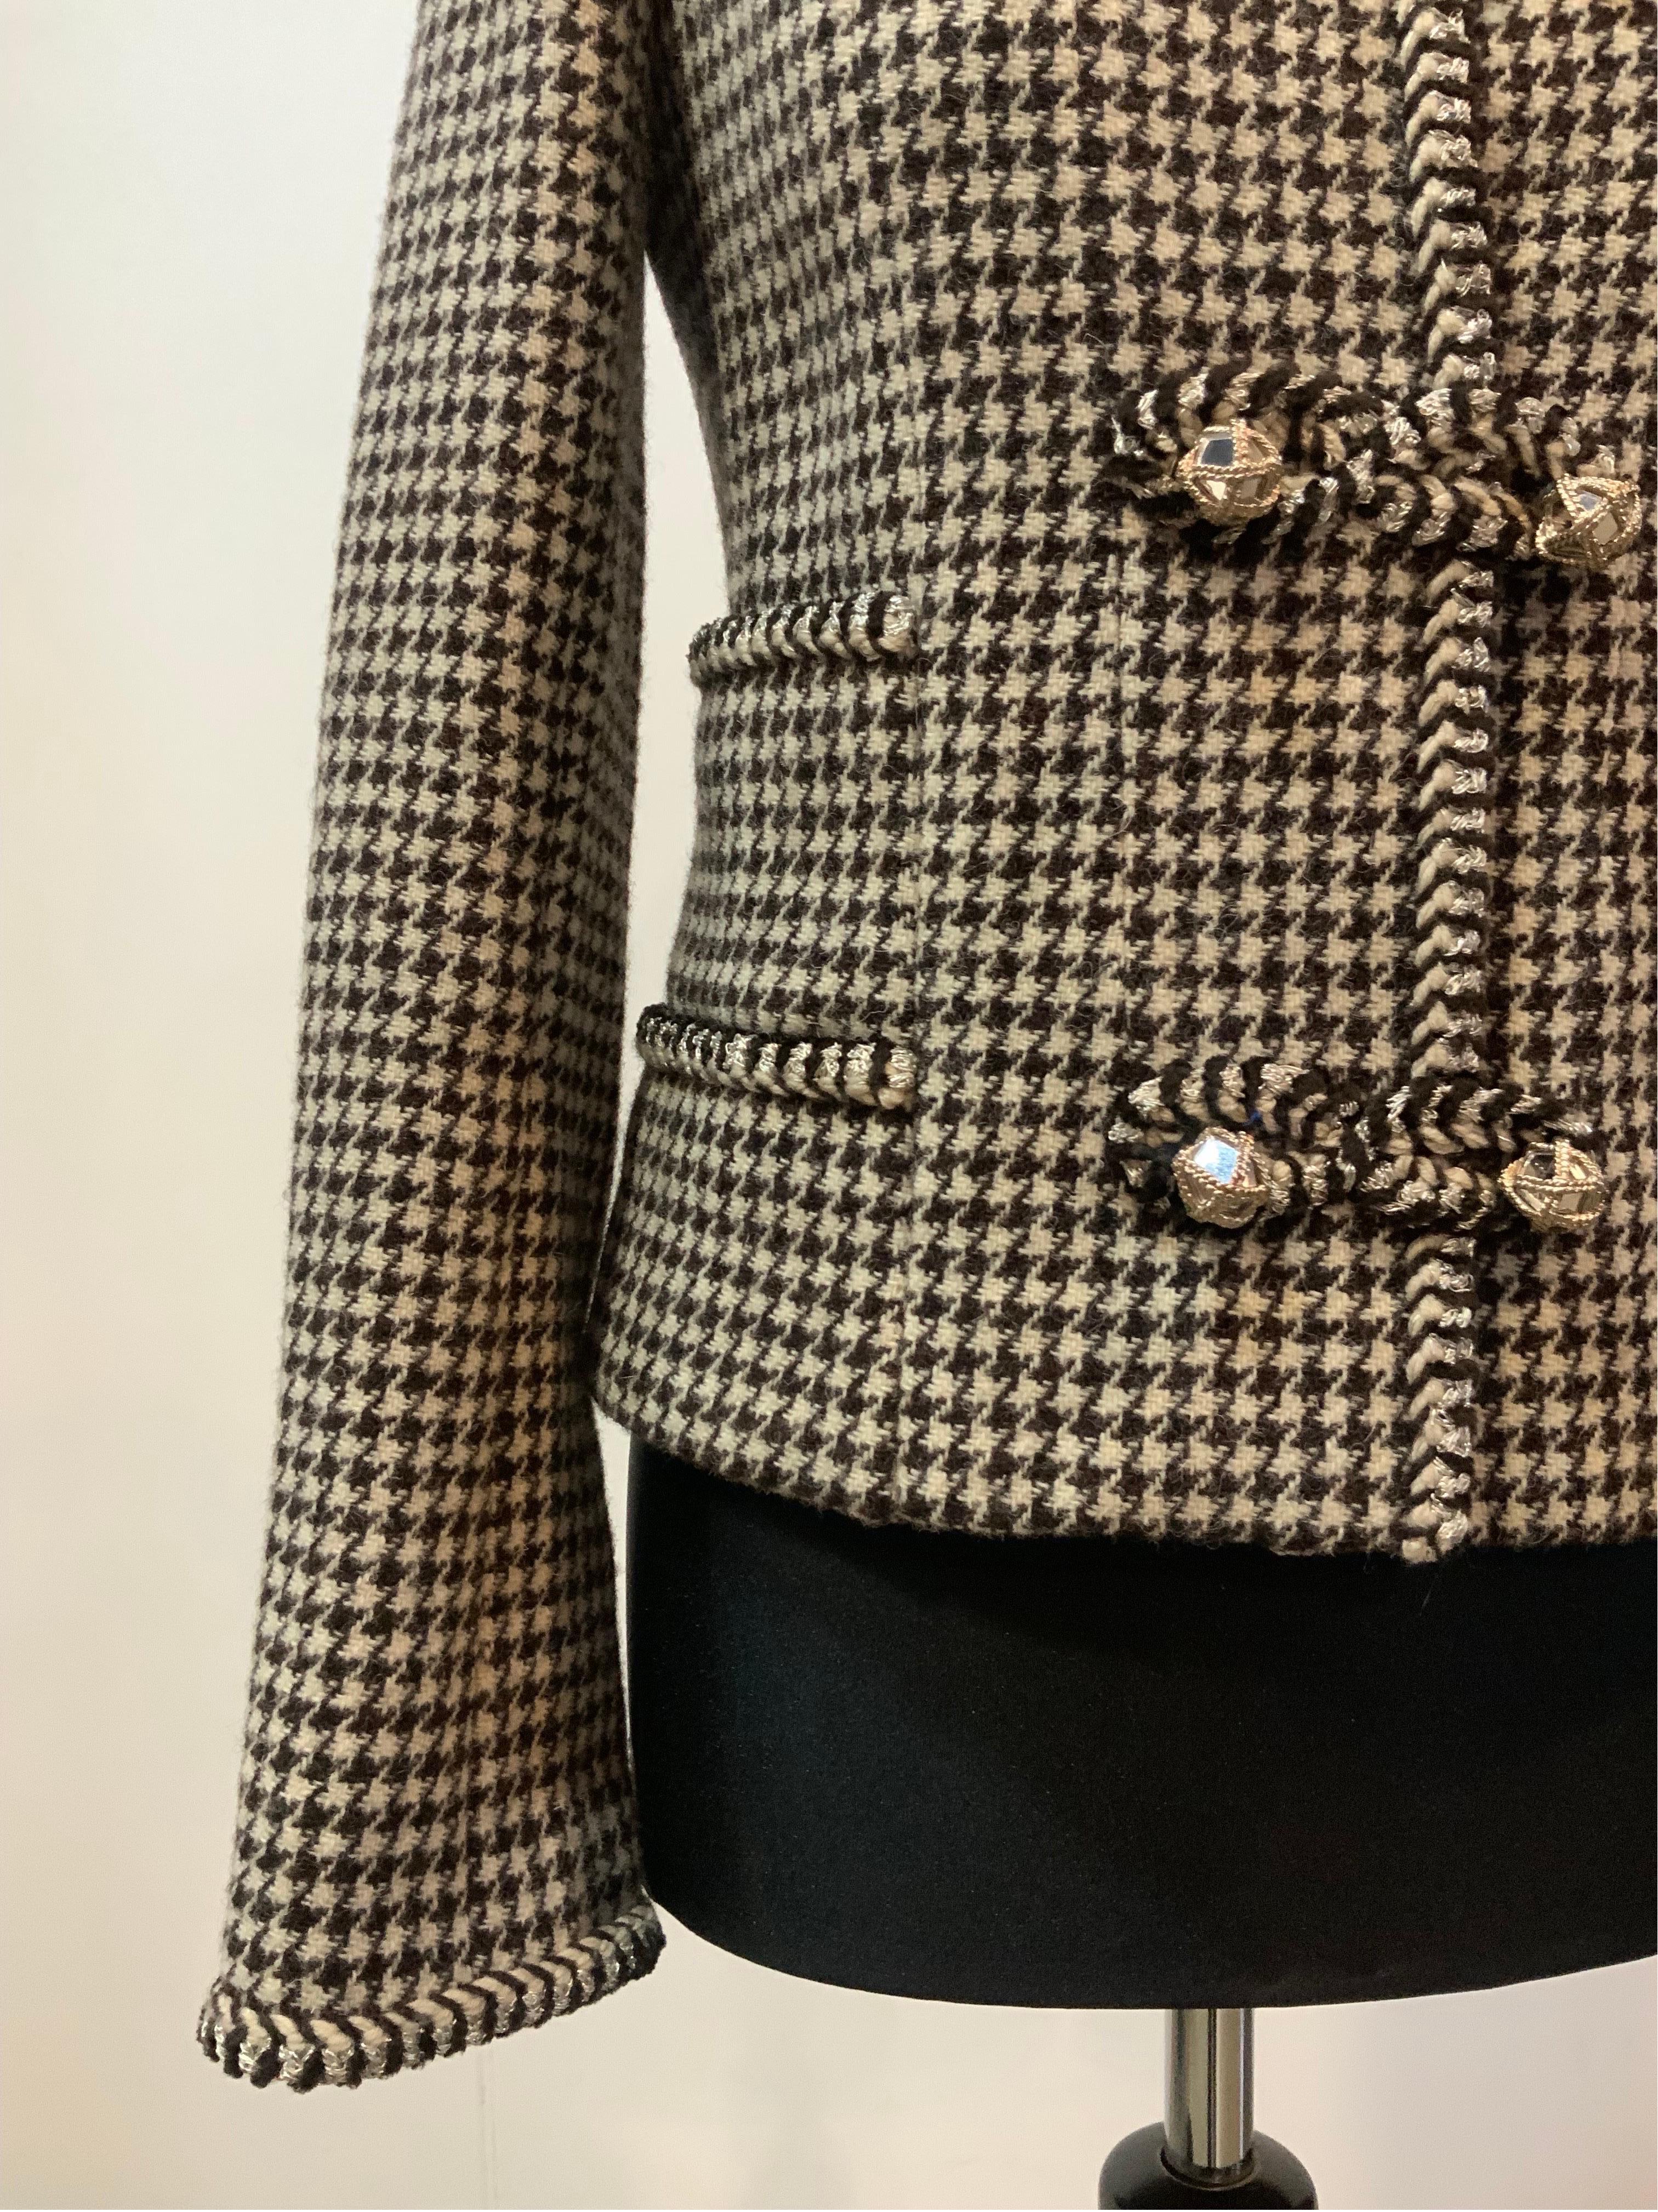 Chanel jacket.
Fall 2015 Ready to wear.
In wool, lined in silk.
Features light padding in the shoulders.
Features internal chain.
Closure with beautiful jewel buttons.
French size 34 which corresponds to an Italian 38.
Shoulders 40 cm
Bust 42